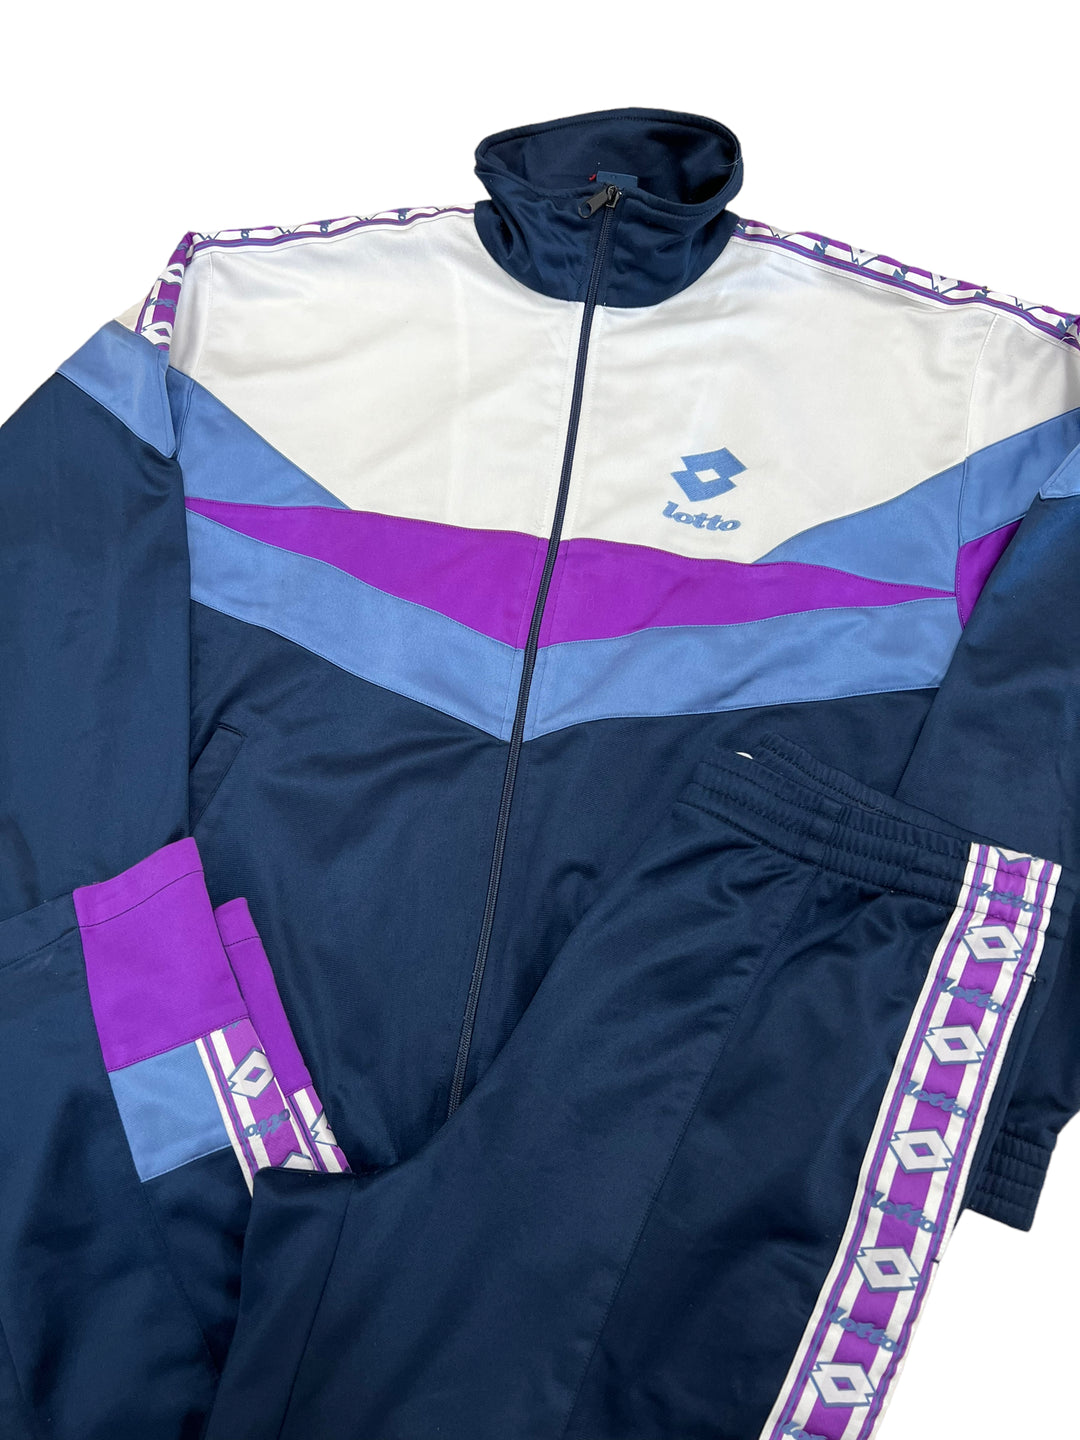 Lotto Vintage Tracksuit Men’s Small